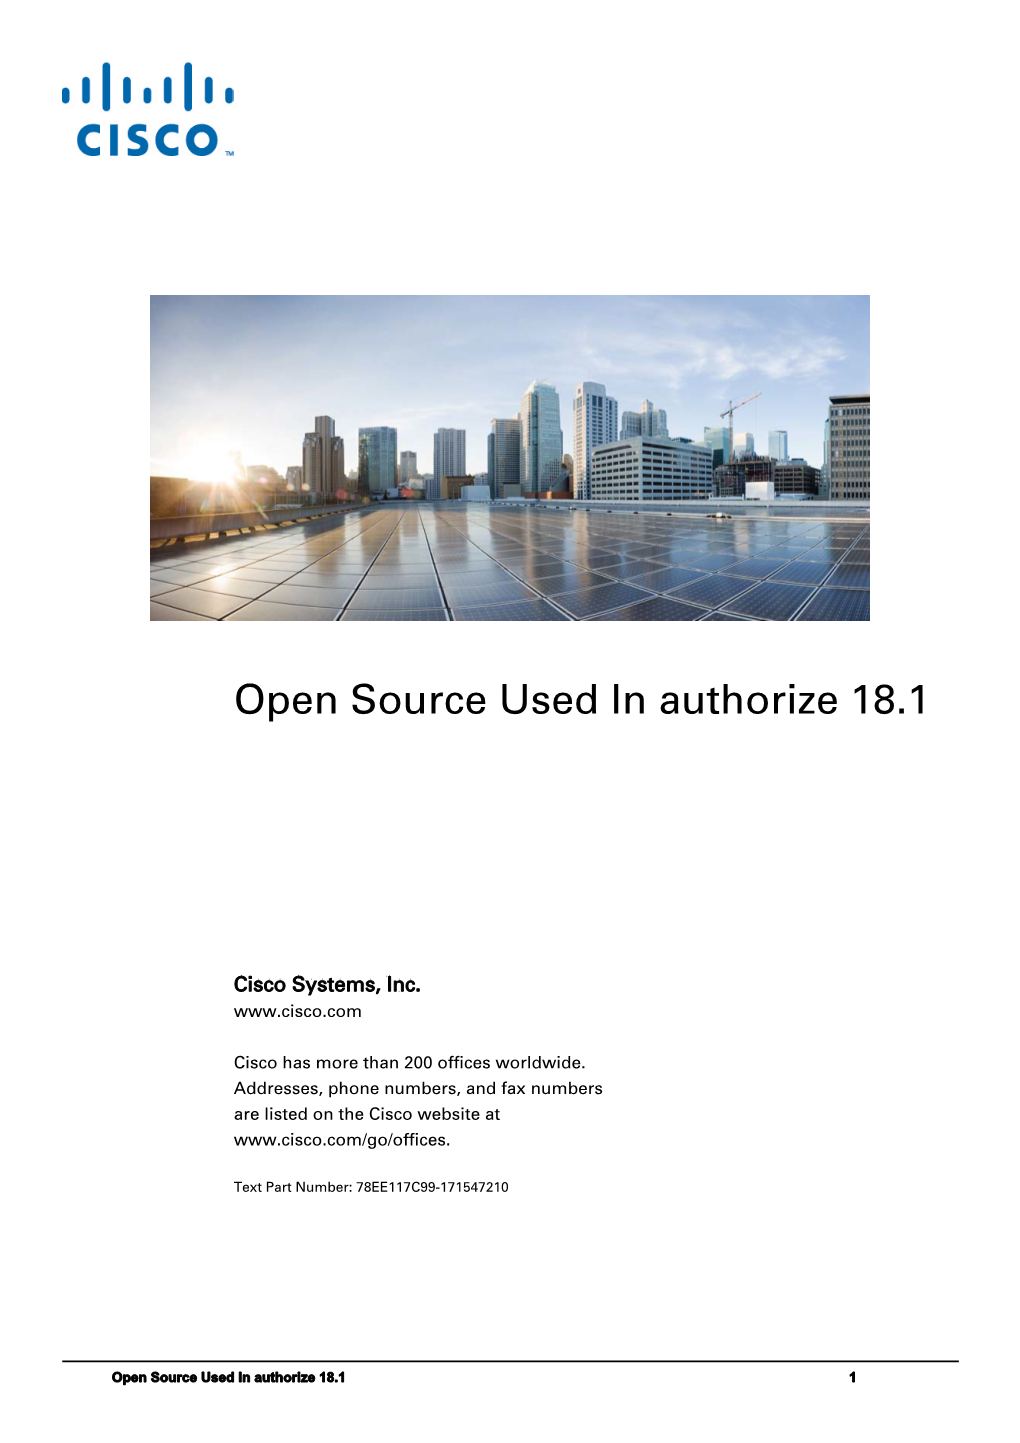 Open Source Used in Authorize 18.1